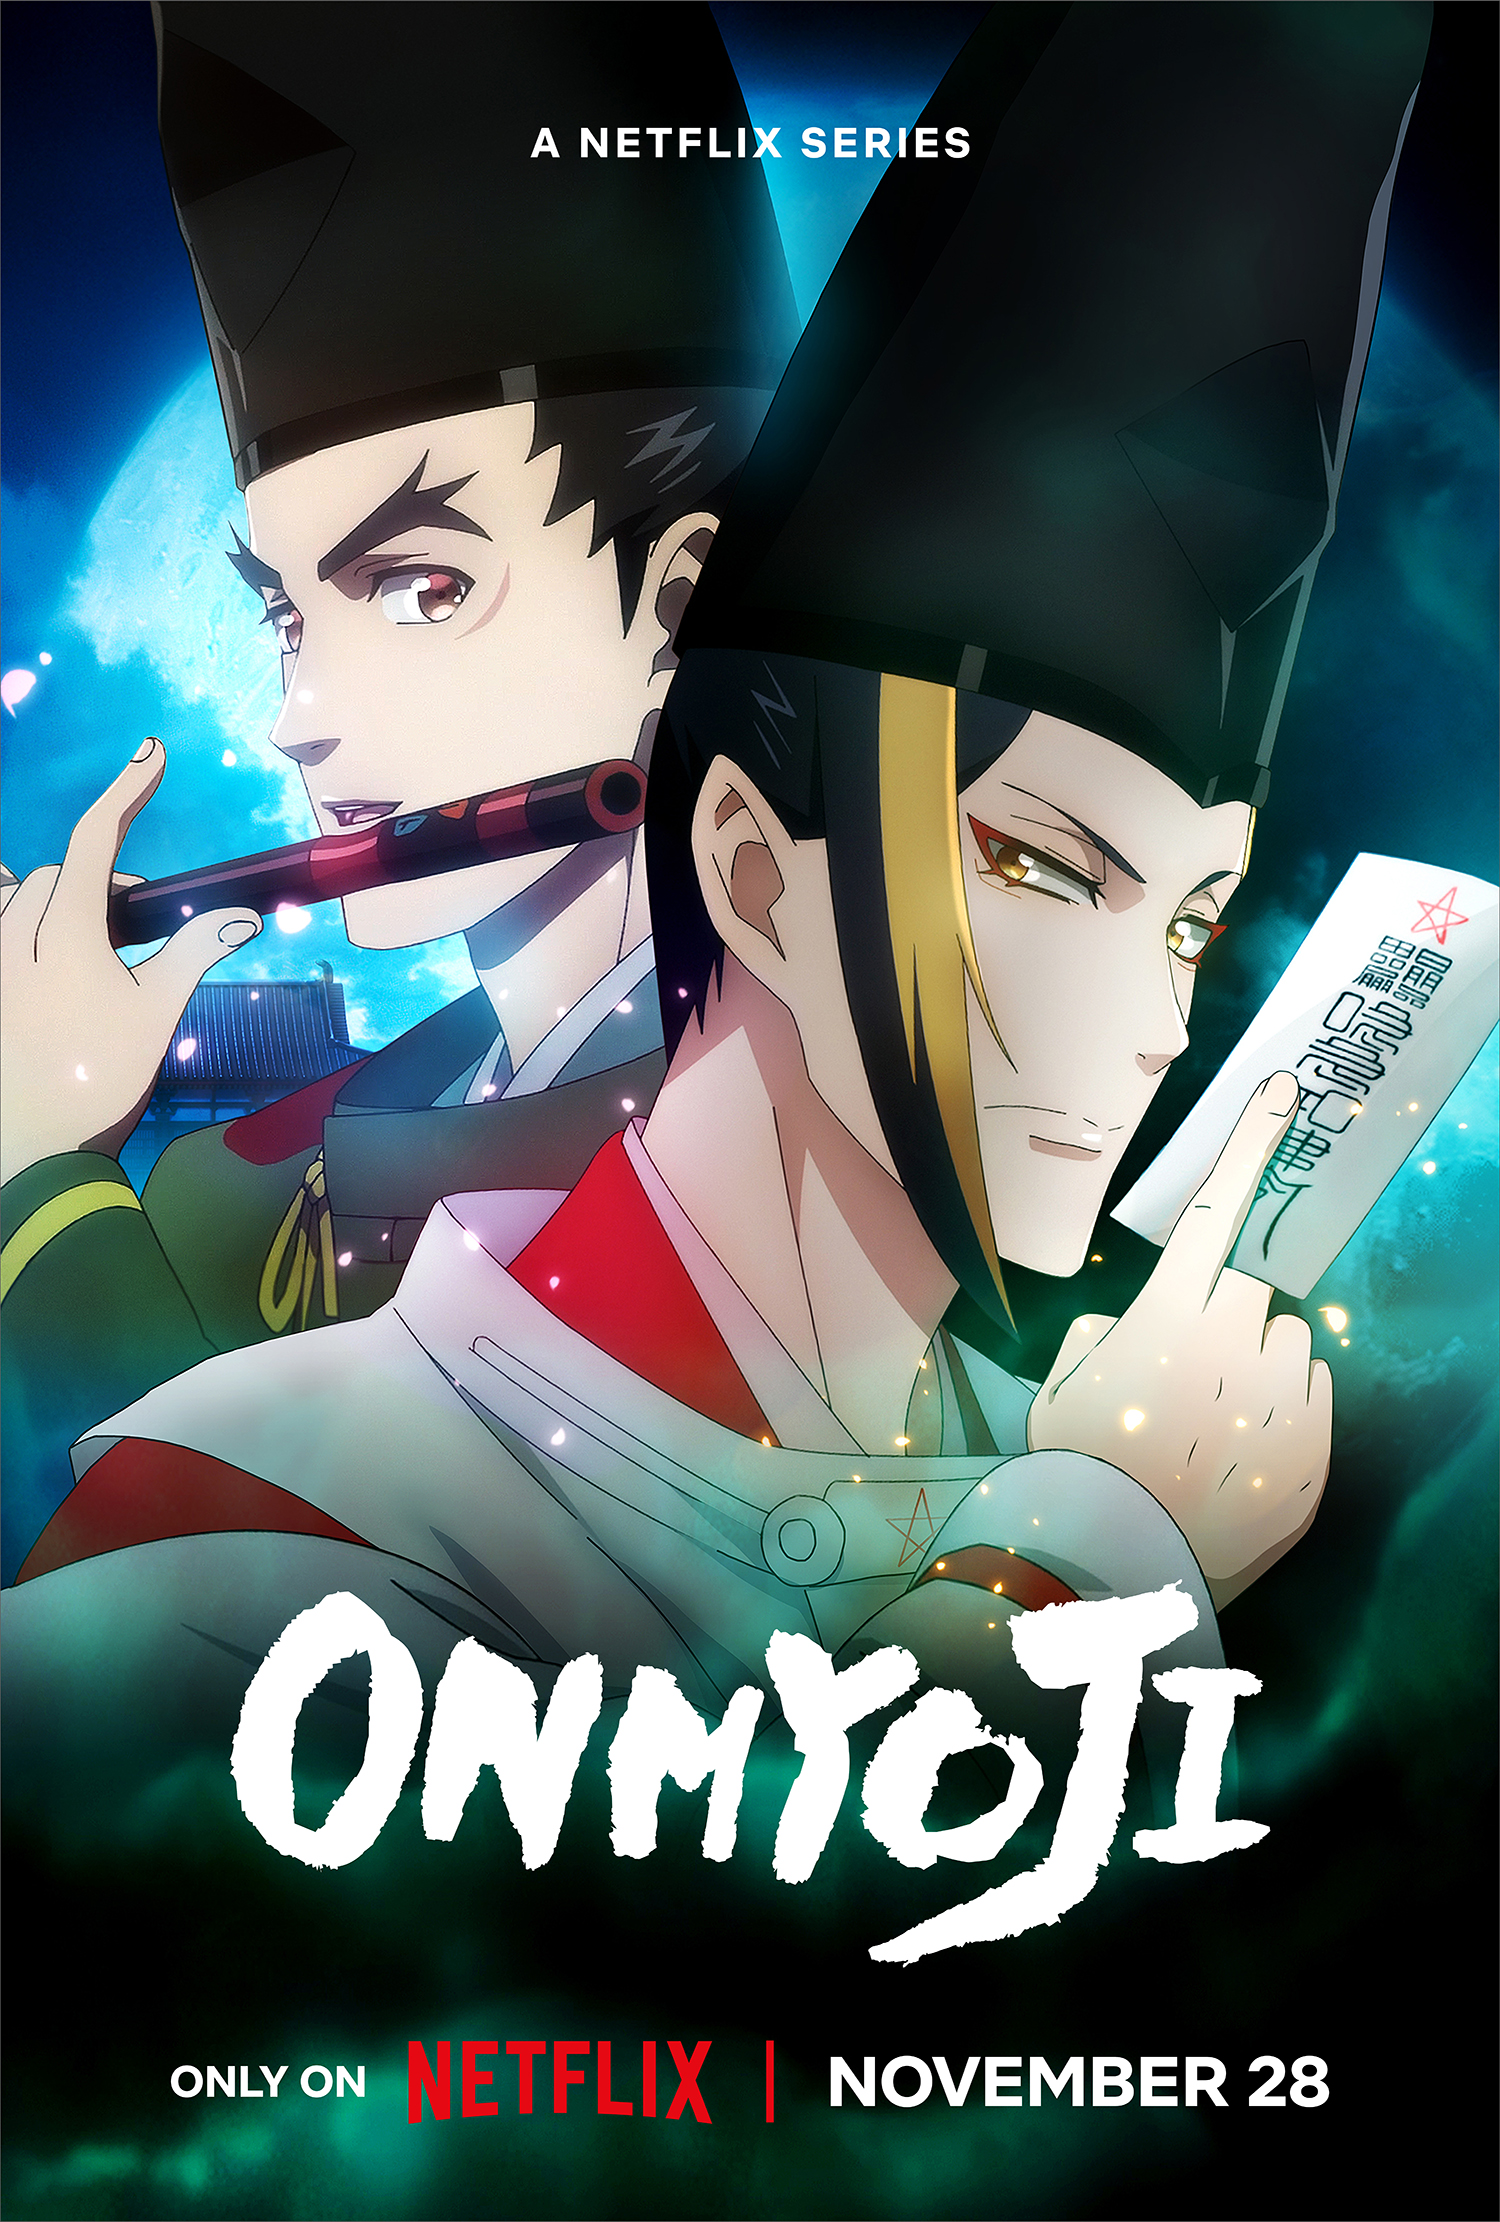 Demon-Slaying Action: Netflix Releases Trailer for First Anime Adaptation  of 'Onmyoji' - About Netflix